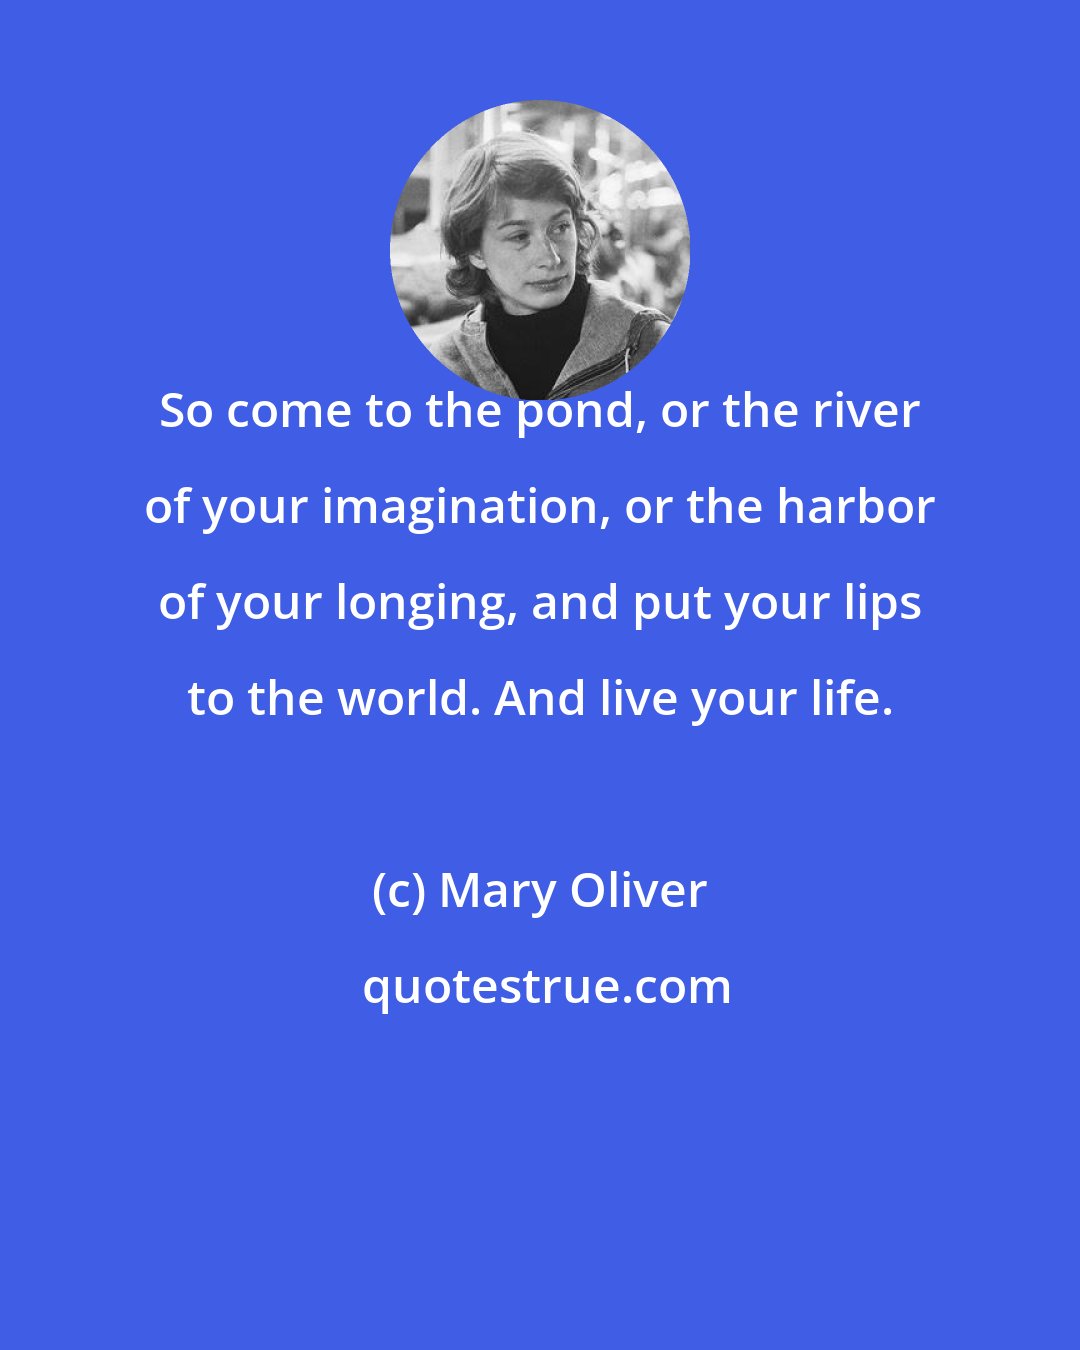 Mary Oliver: So come to the pond, or the river of your imagination, or the harbor of your longing, and put your lips to the world. And live your life.